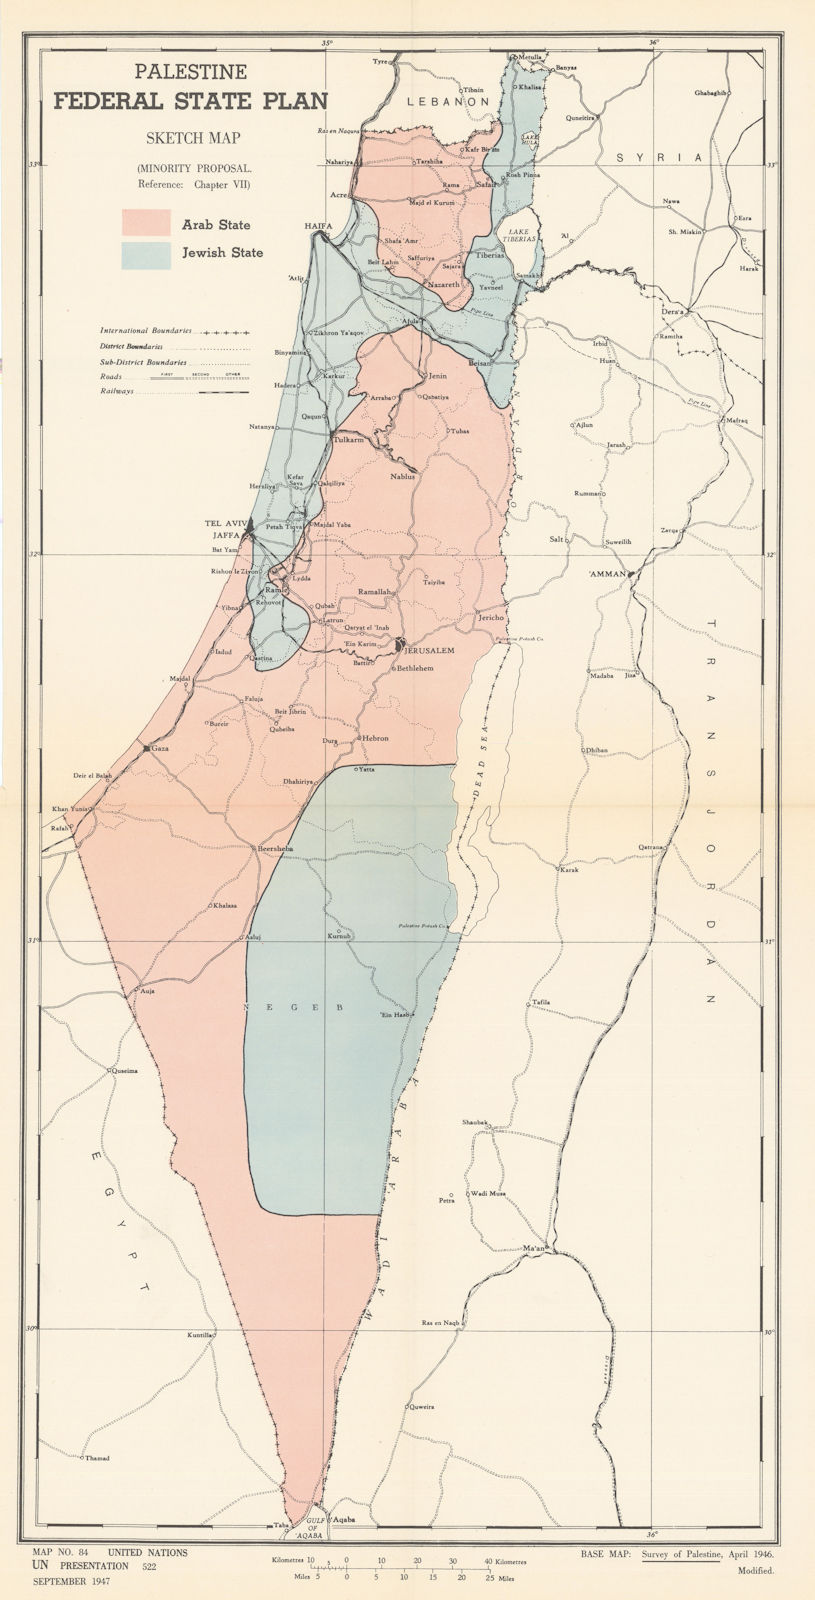 Palestine Federal State Plan - Minority proposal. United Nations UNSCOP 1947 map